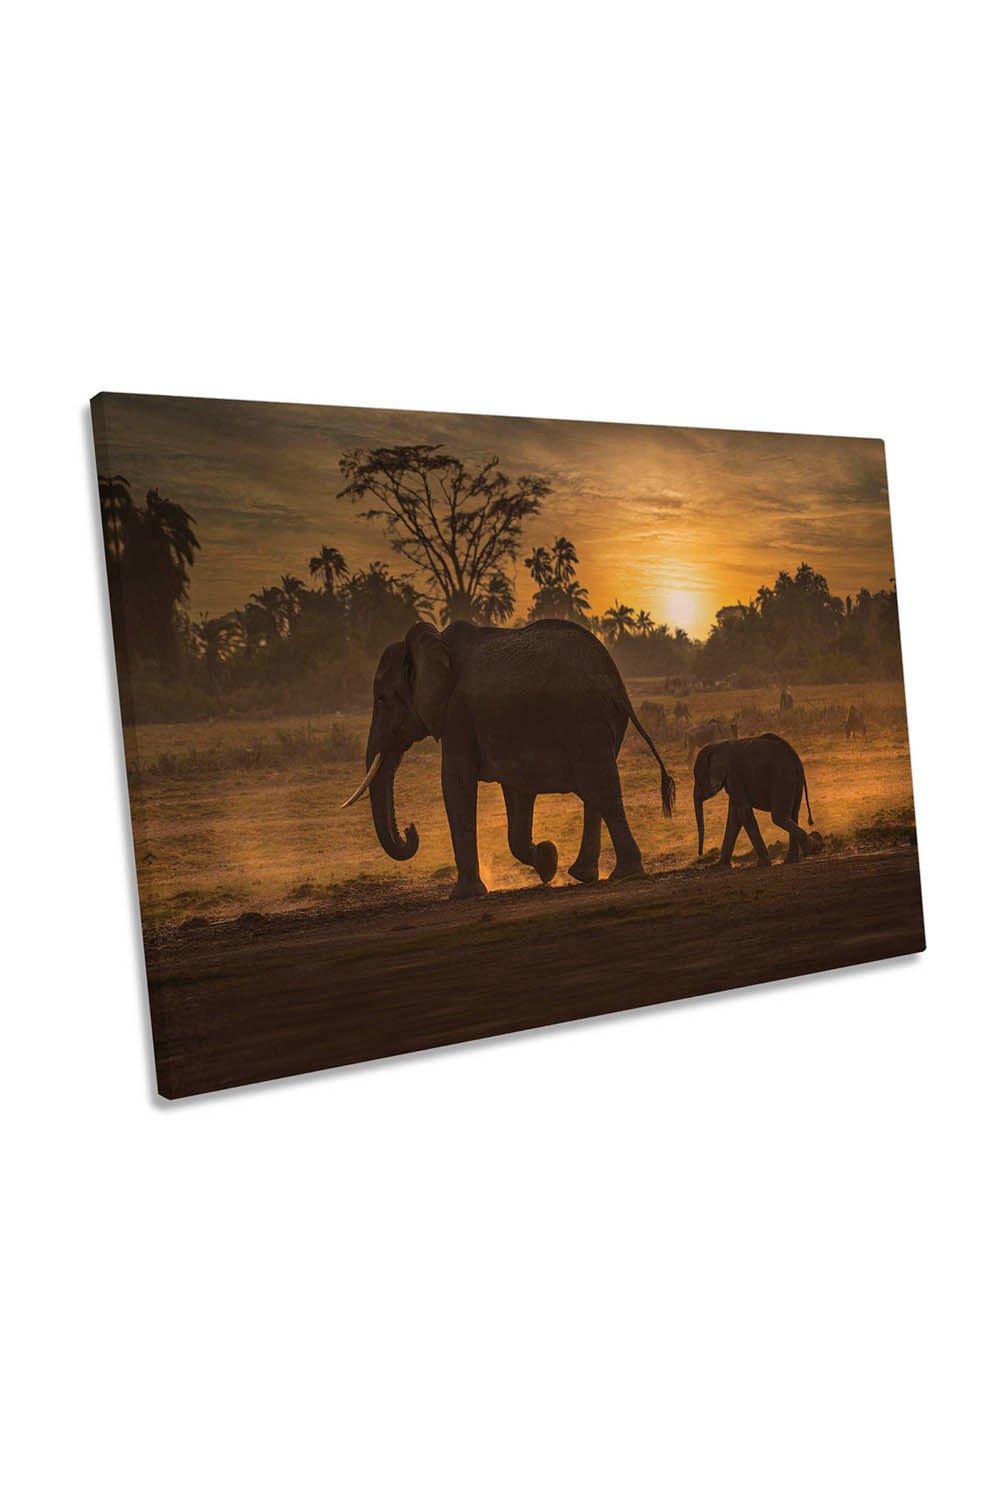 Follow Me Elephant Family Sunset Canvas Wall Art Picture Print